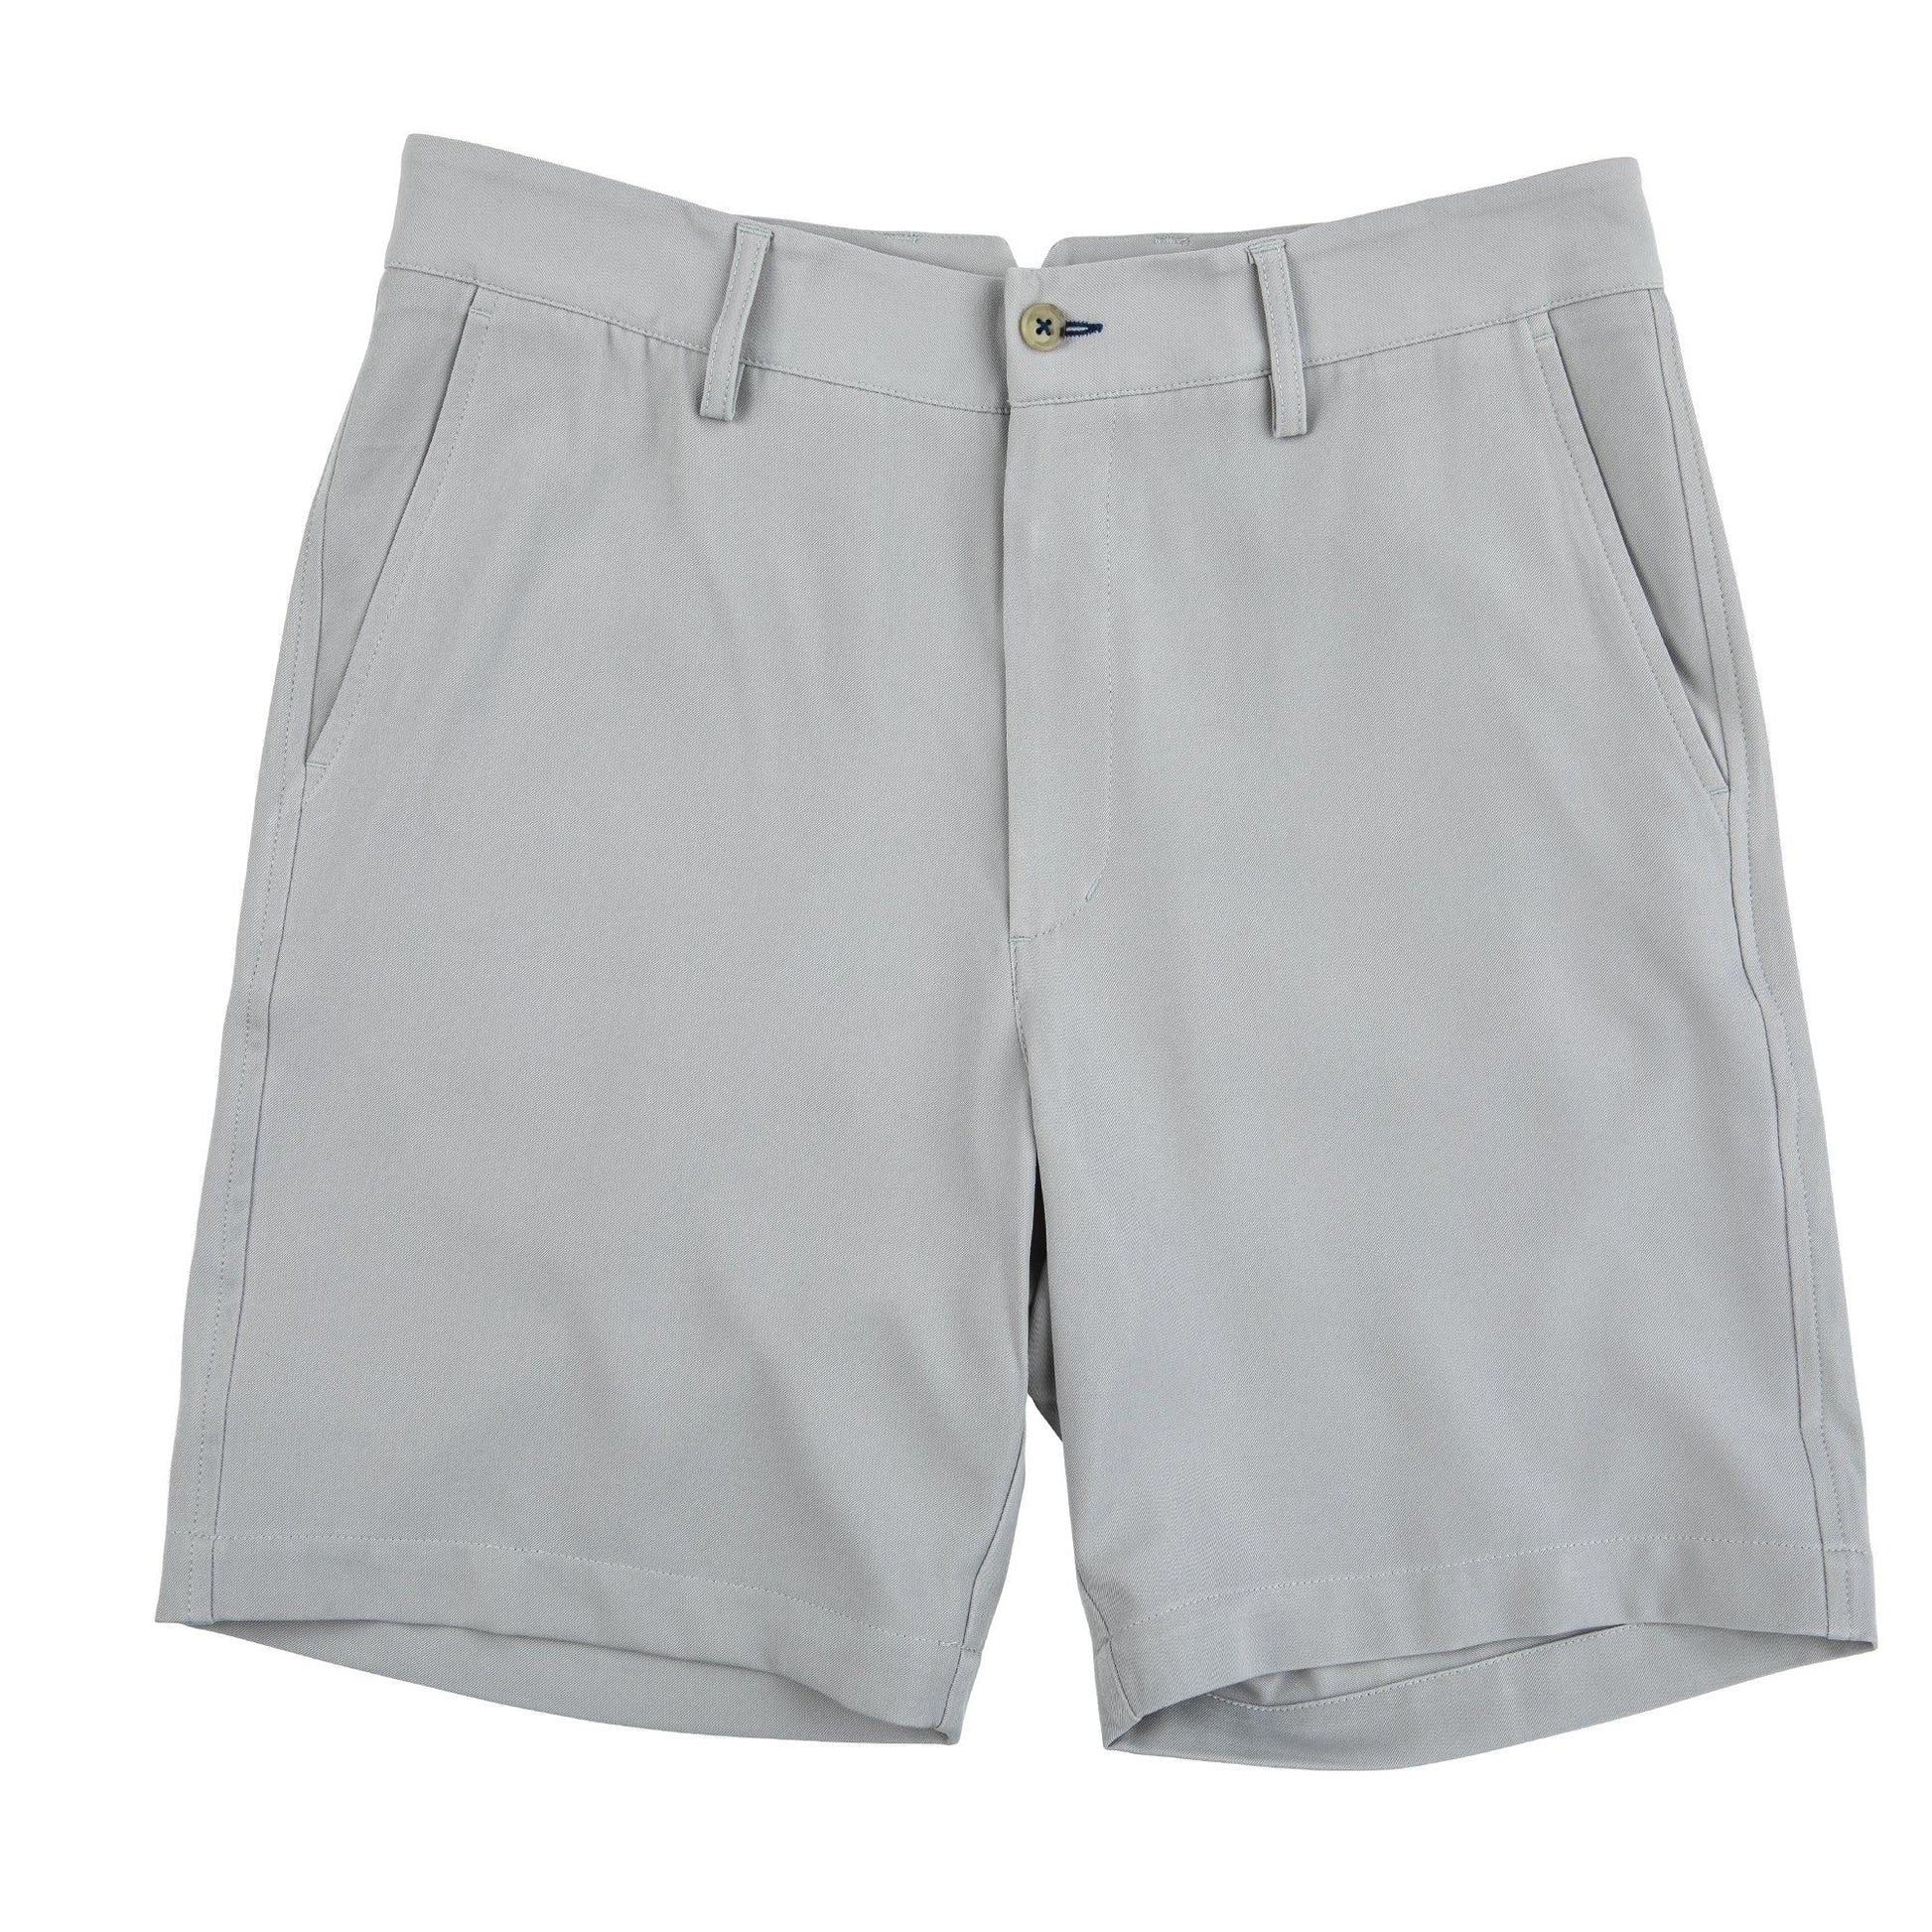 McGuirk's Golf, Gents Shorts